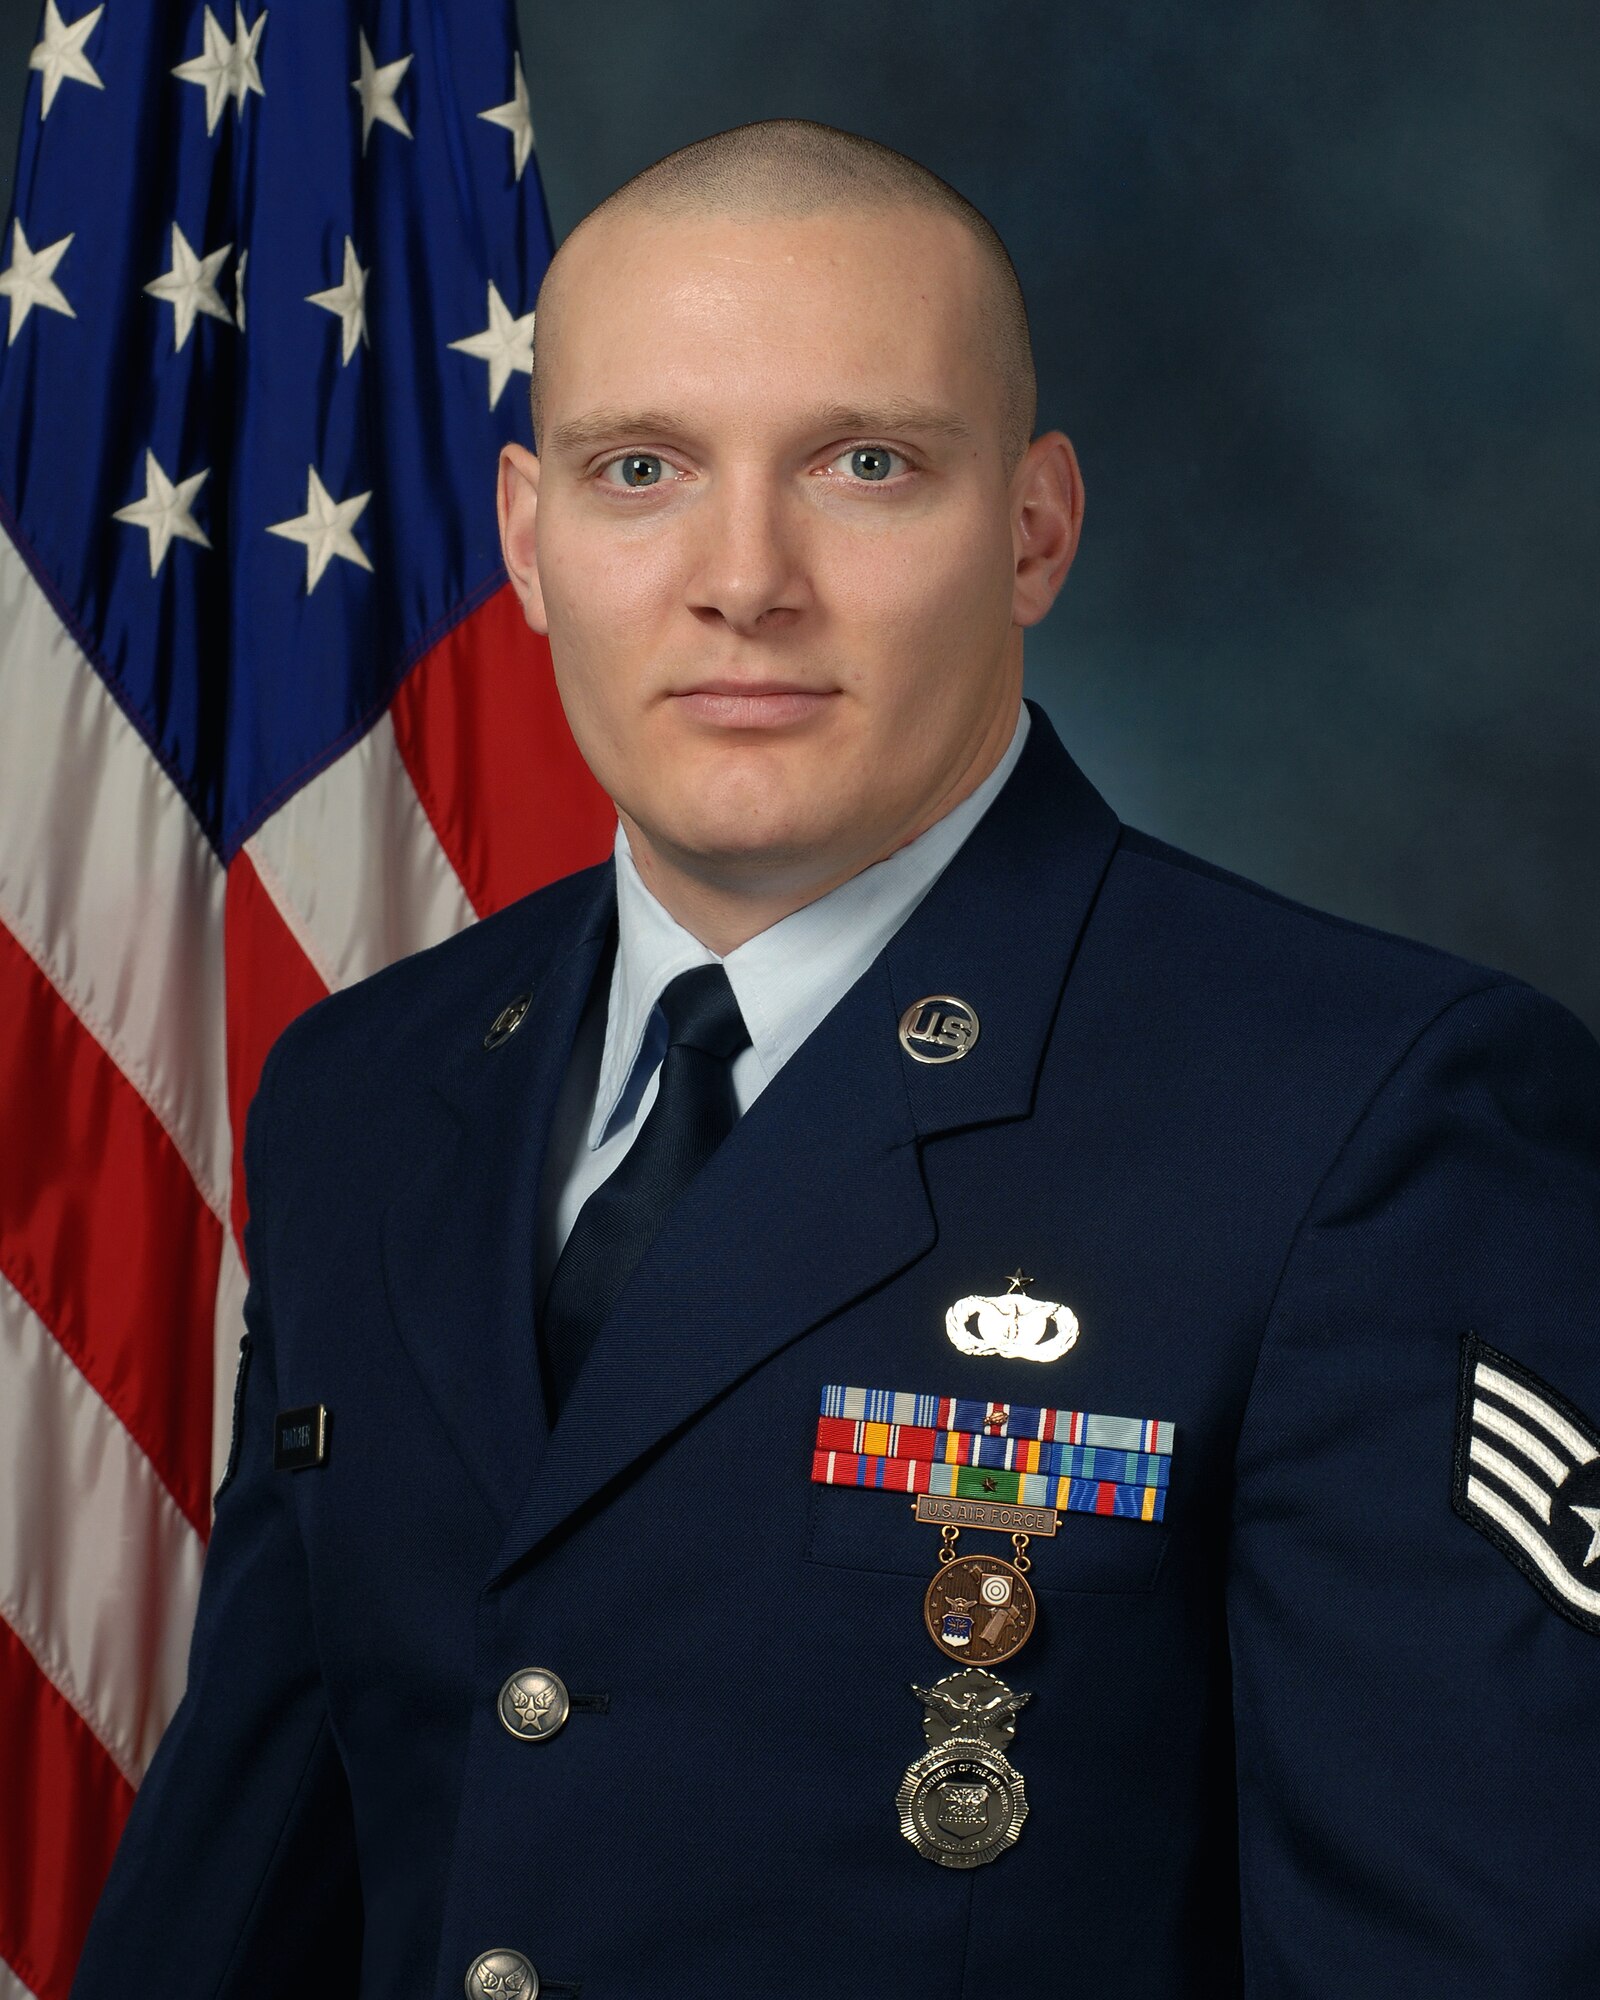 Staff Sgt. Jeremy Thatcher, a tactical response force leader with the 341st Security Forces Group at Malmstrom Air Force Base, Mont., was recognized as Noncommissioned Officer of the Year.